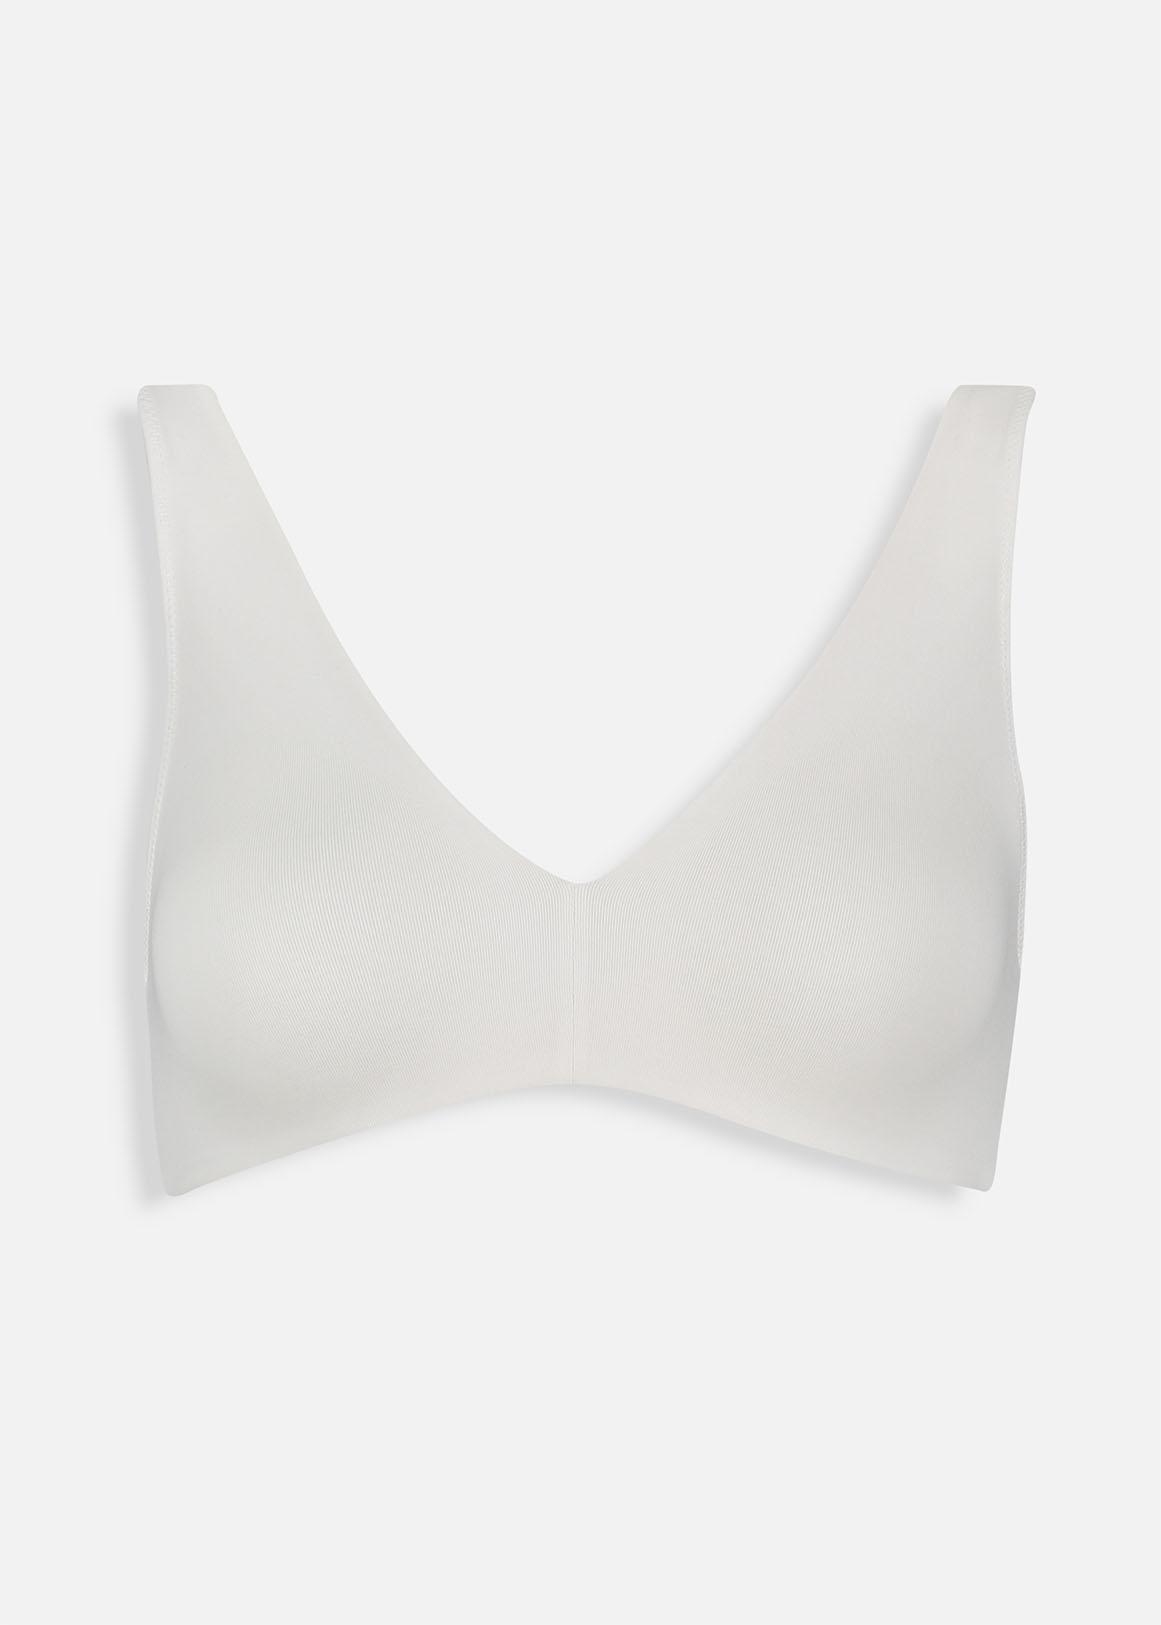 ORNELA Women''s Pure Cotton Non-Padded Wire Free T-Shirt Bra for